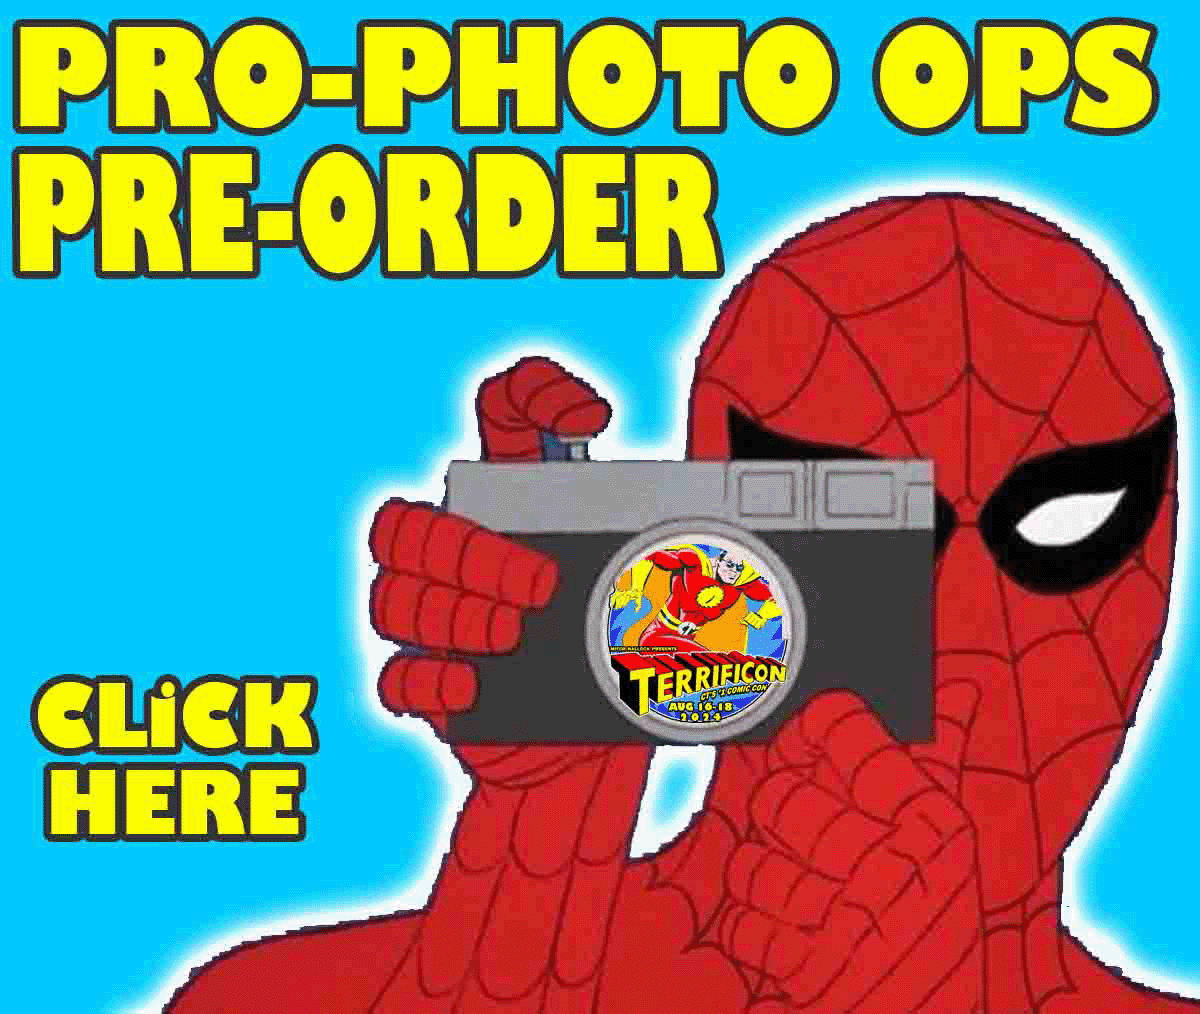 PRO PHOTO OPS PRE ORDER